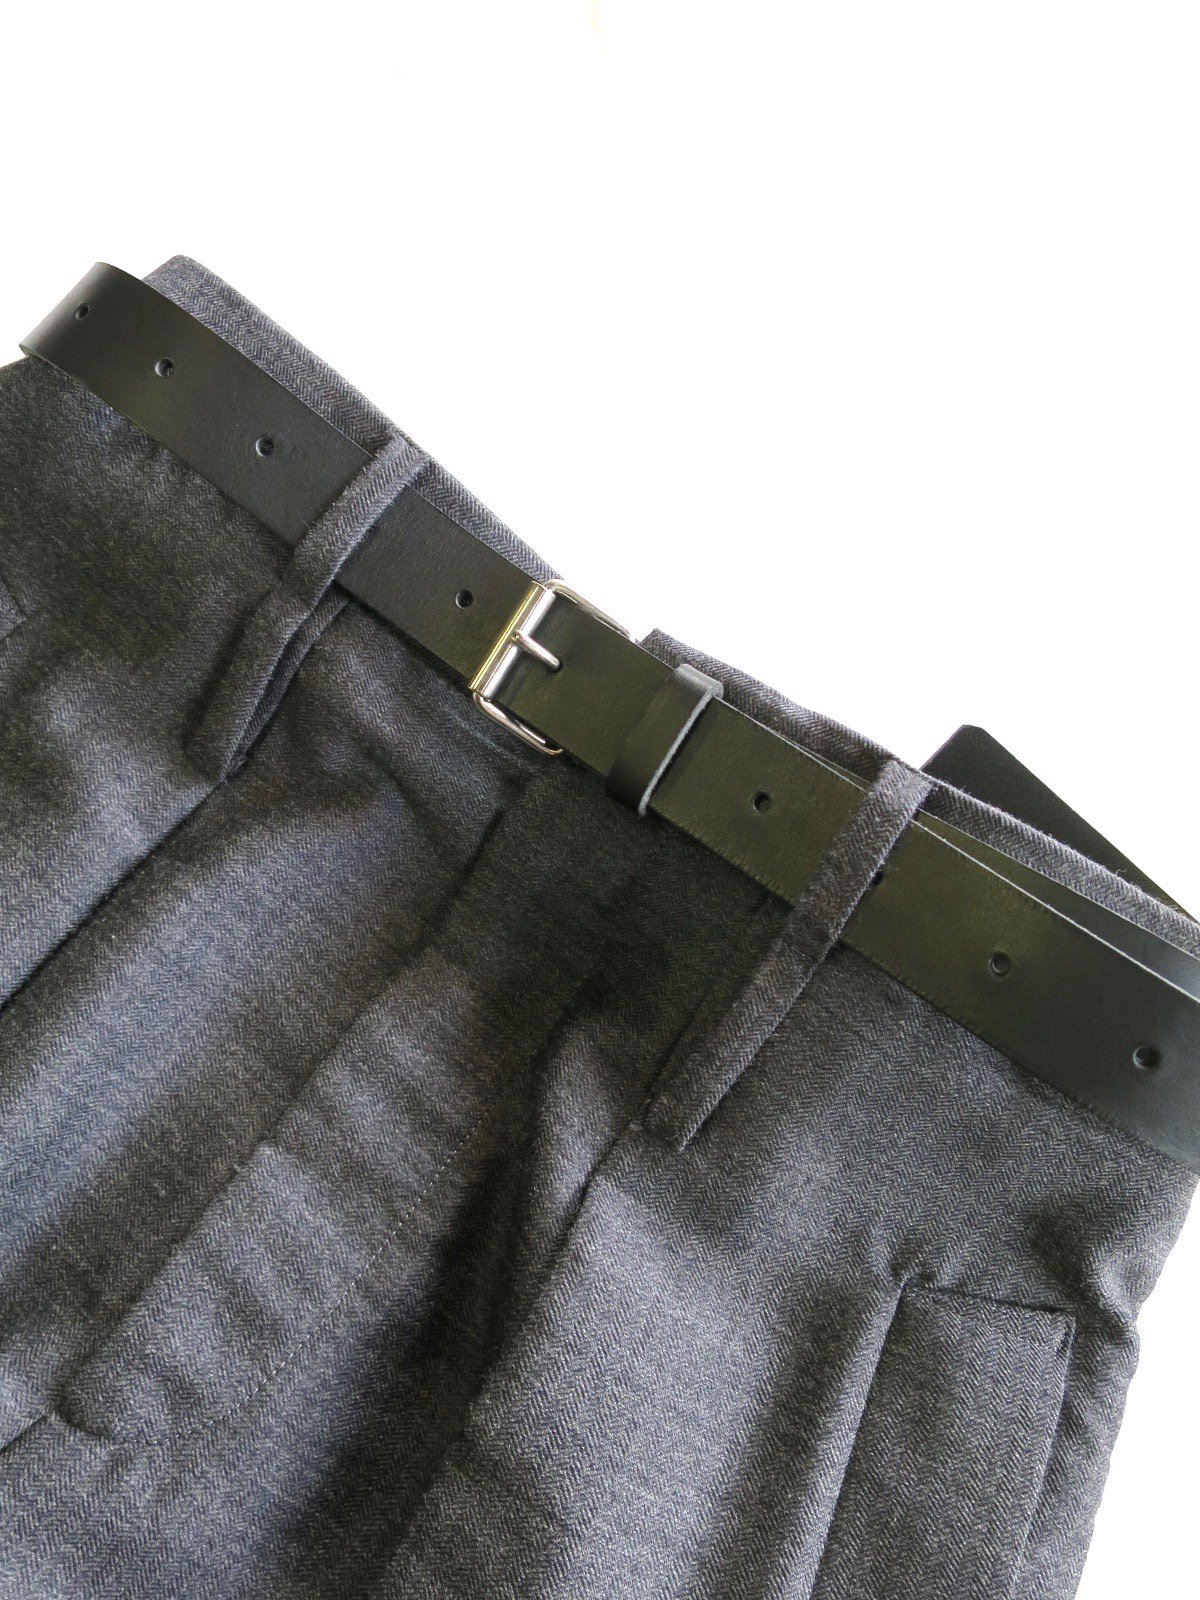 071031● BLESS N°18 Leather belt 30mm レザー５-新品または未使用品